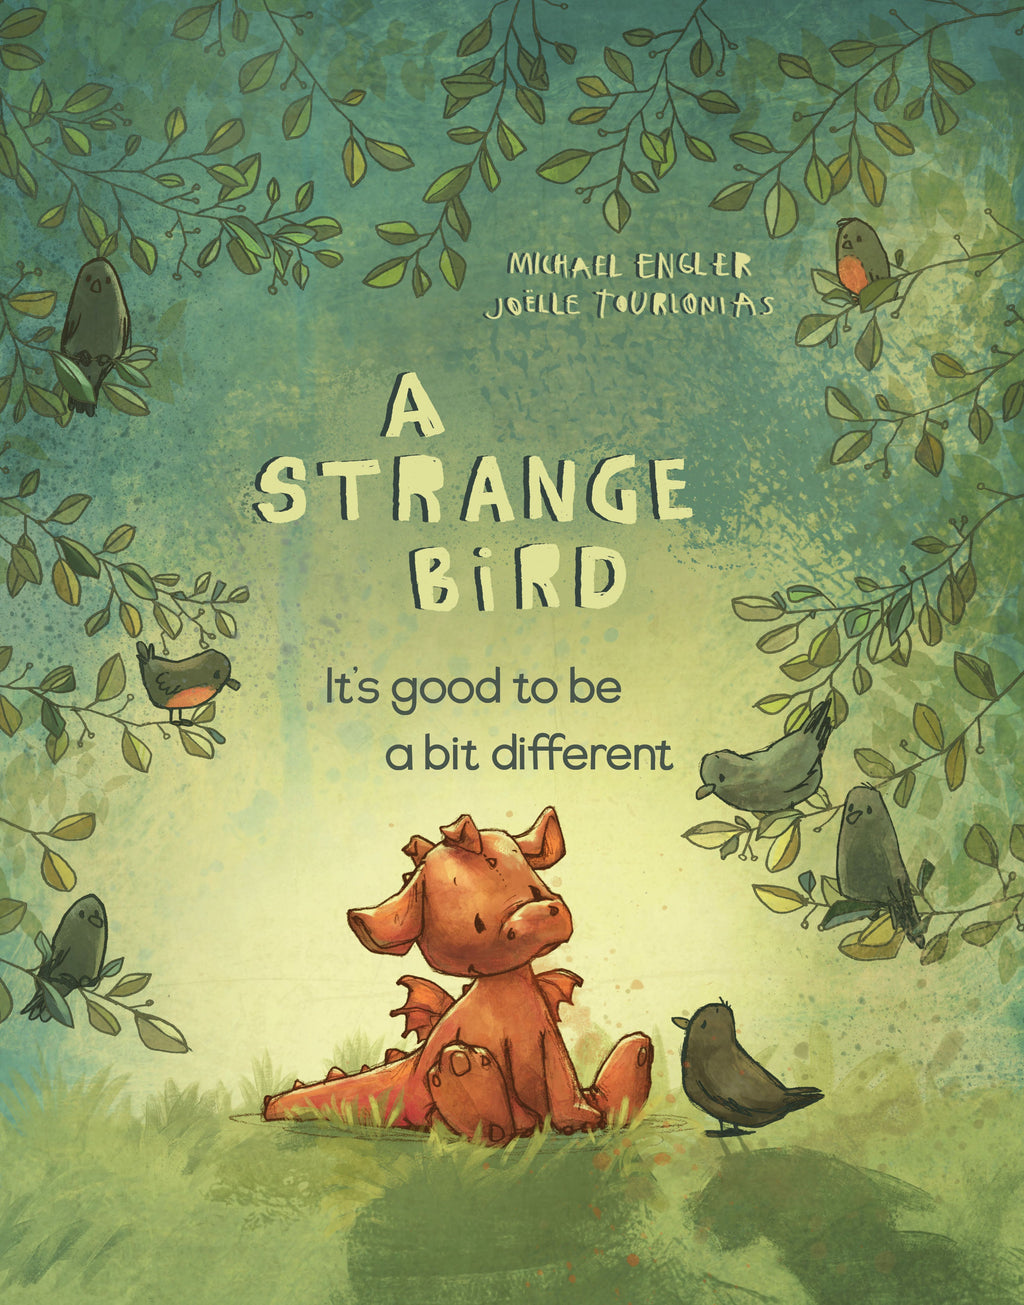 A Strange Bird: It's good to be a bit different